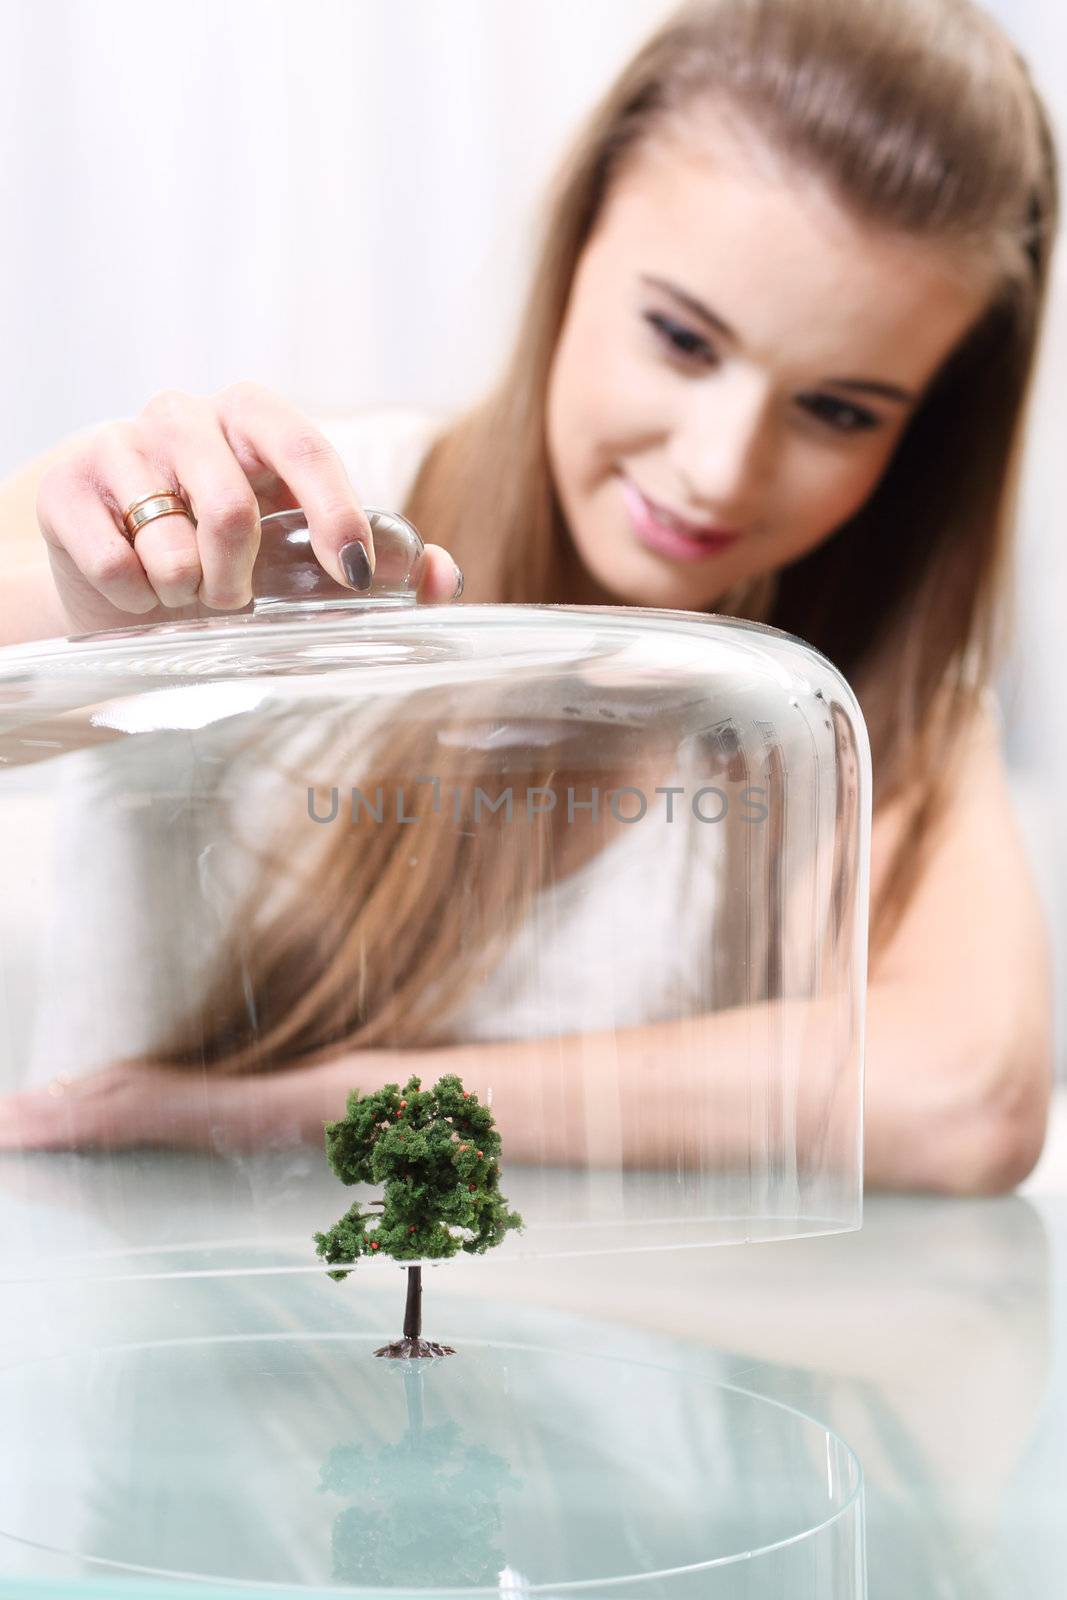 Girl covers a small artificial tree on the table, Ecological concept